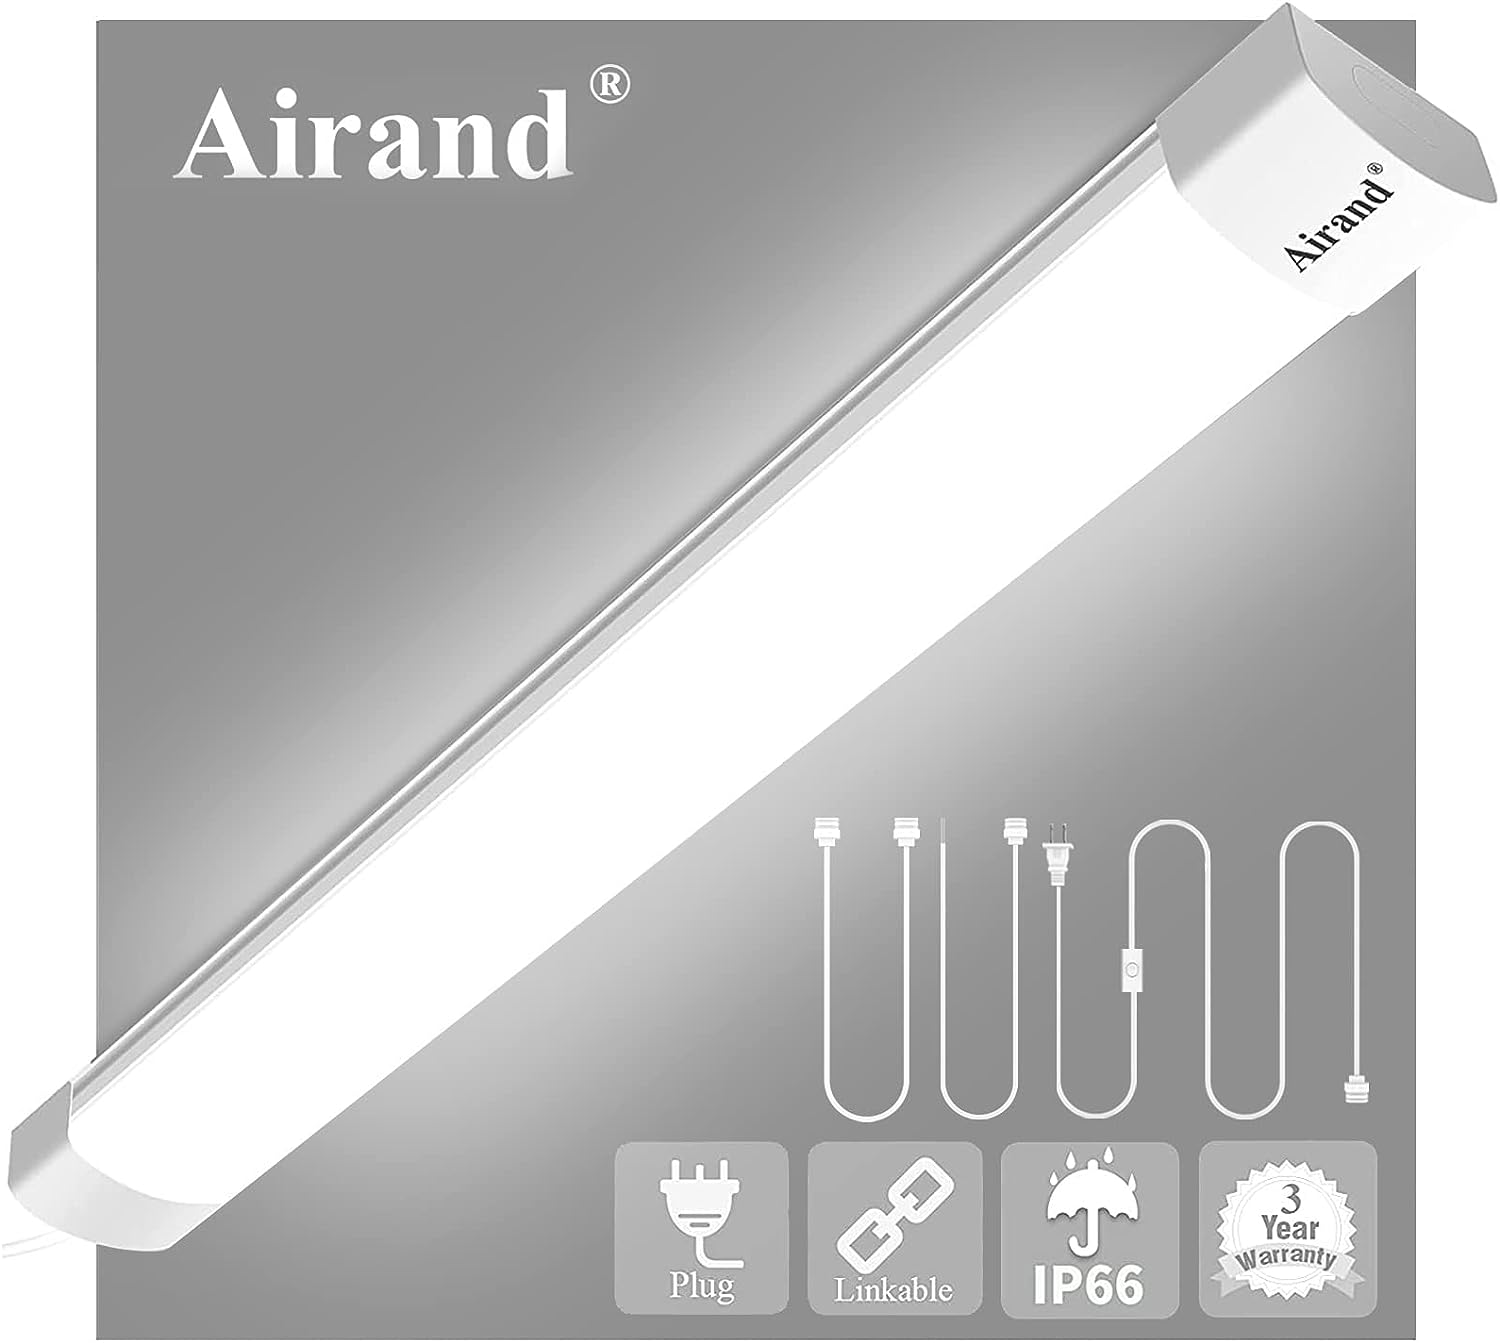 Airand Utility LED Shop Light Fixture 2FT 4FT with [...]